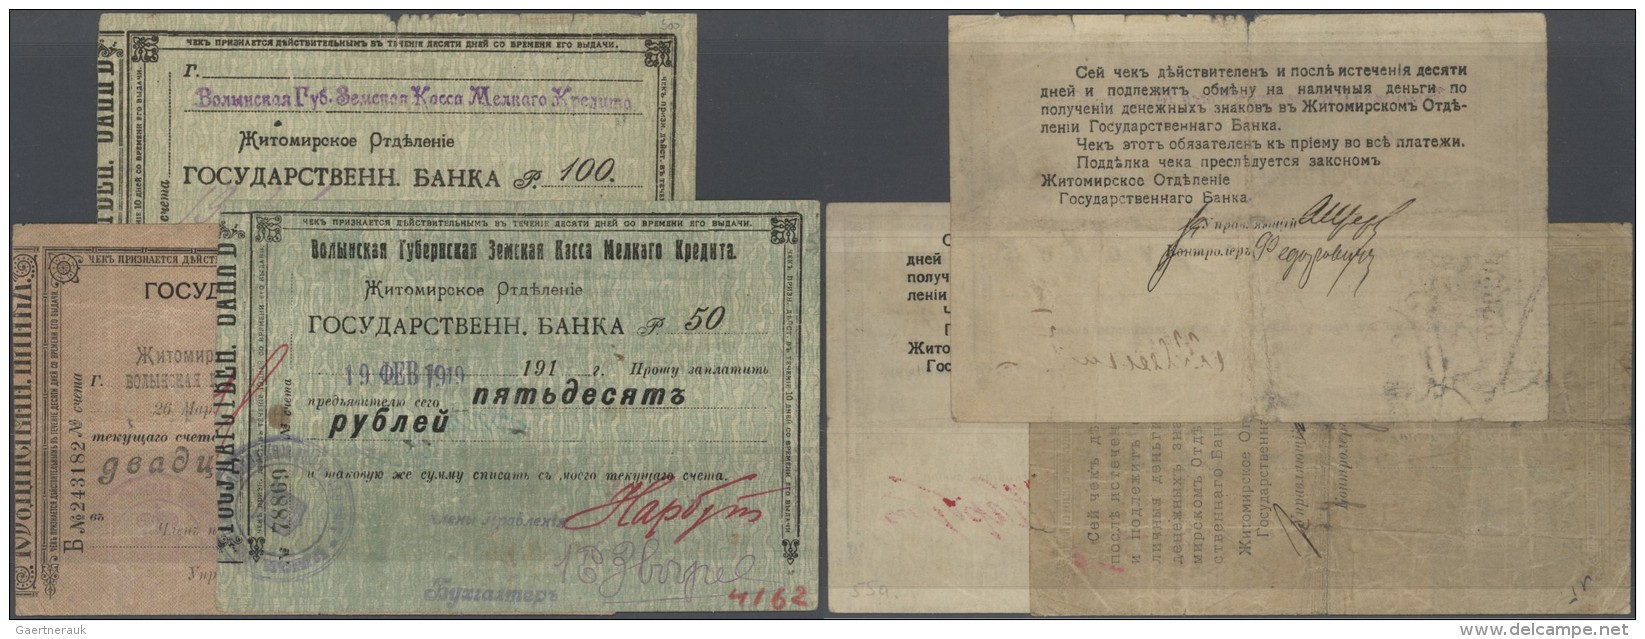 Ukraina / Ukraine: Zhytomyr, Volynsk District Savings Bank For Small Loans Set With 14 Notes Containing 5 X 25, 8 X 50 A - Ukraine